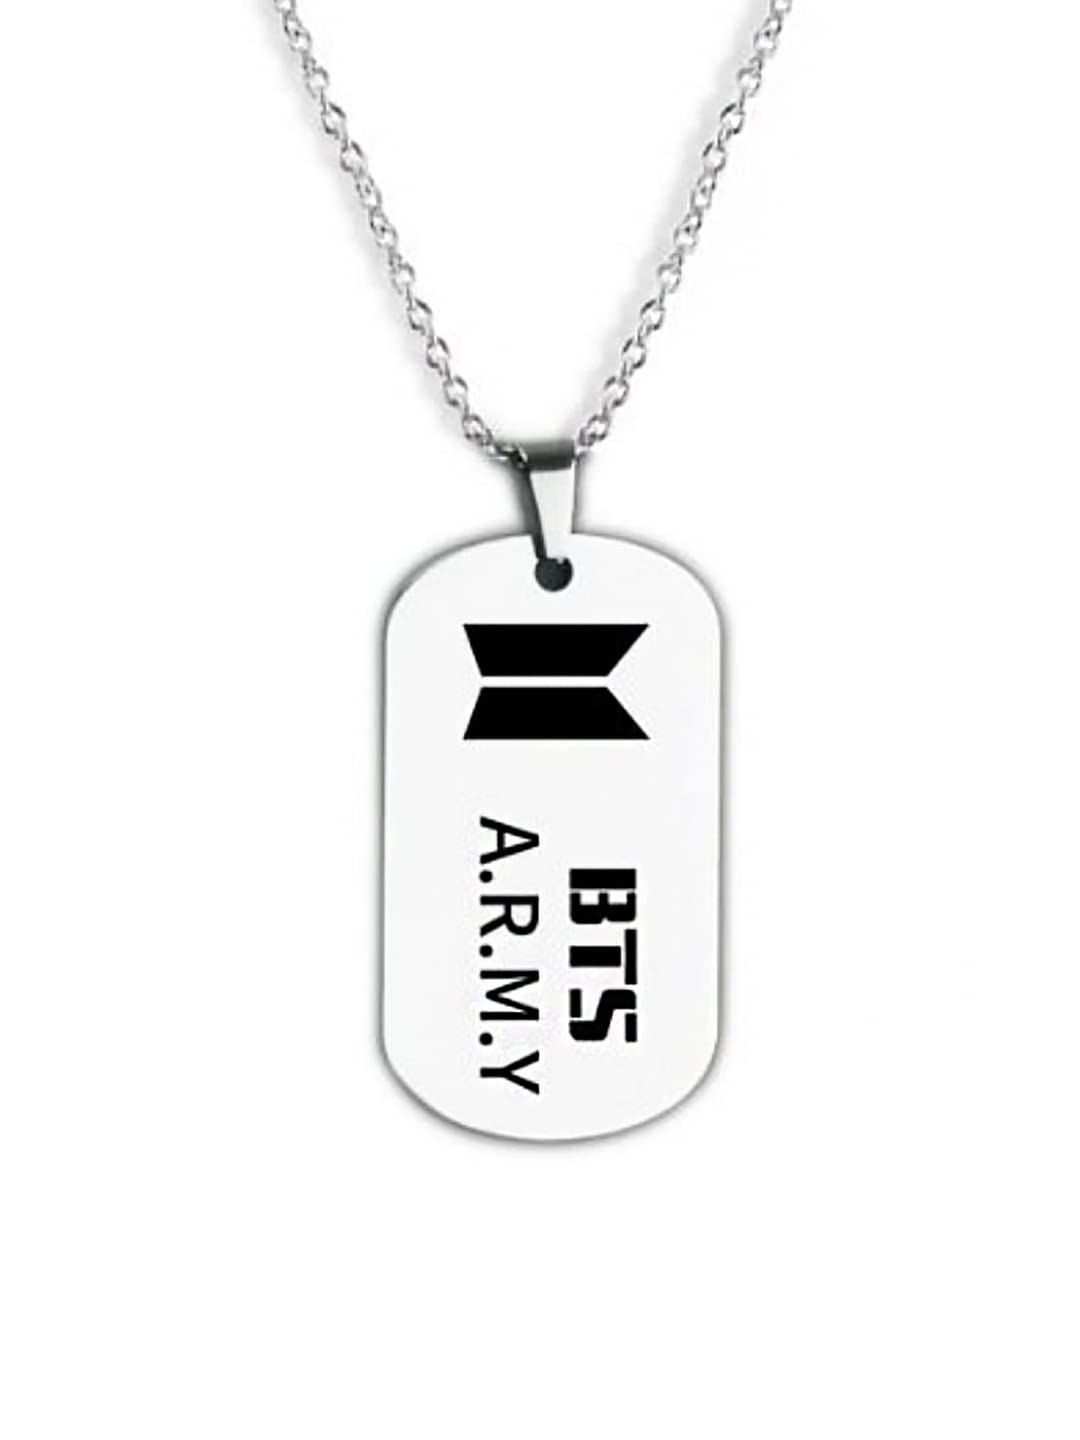 Yellow Chimes BTS Pendant for Women Silver Chain Pendant Stainless Steel 3 mm BTS Army Dog Tag Pendant Necklace for Men and Boys.